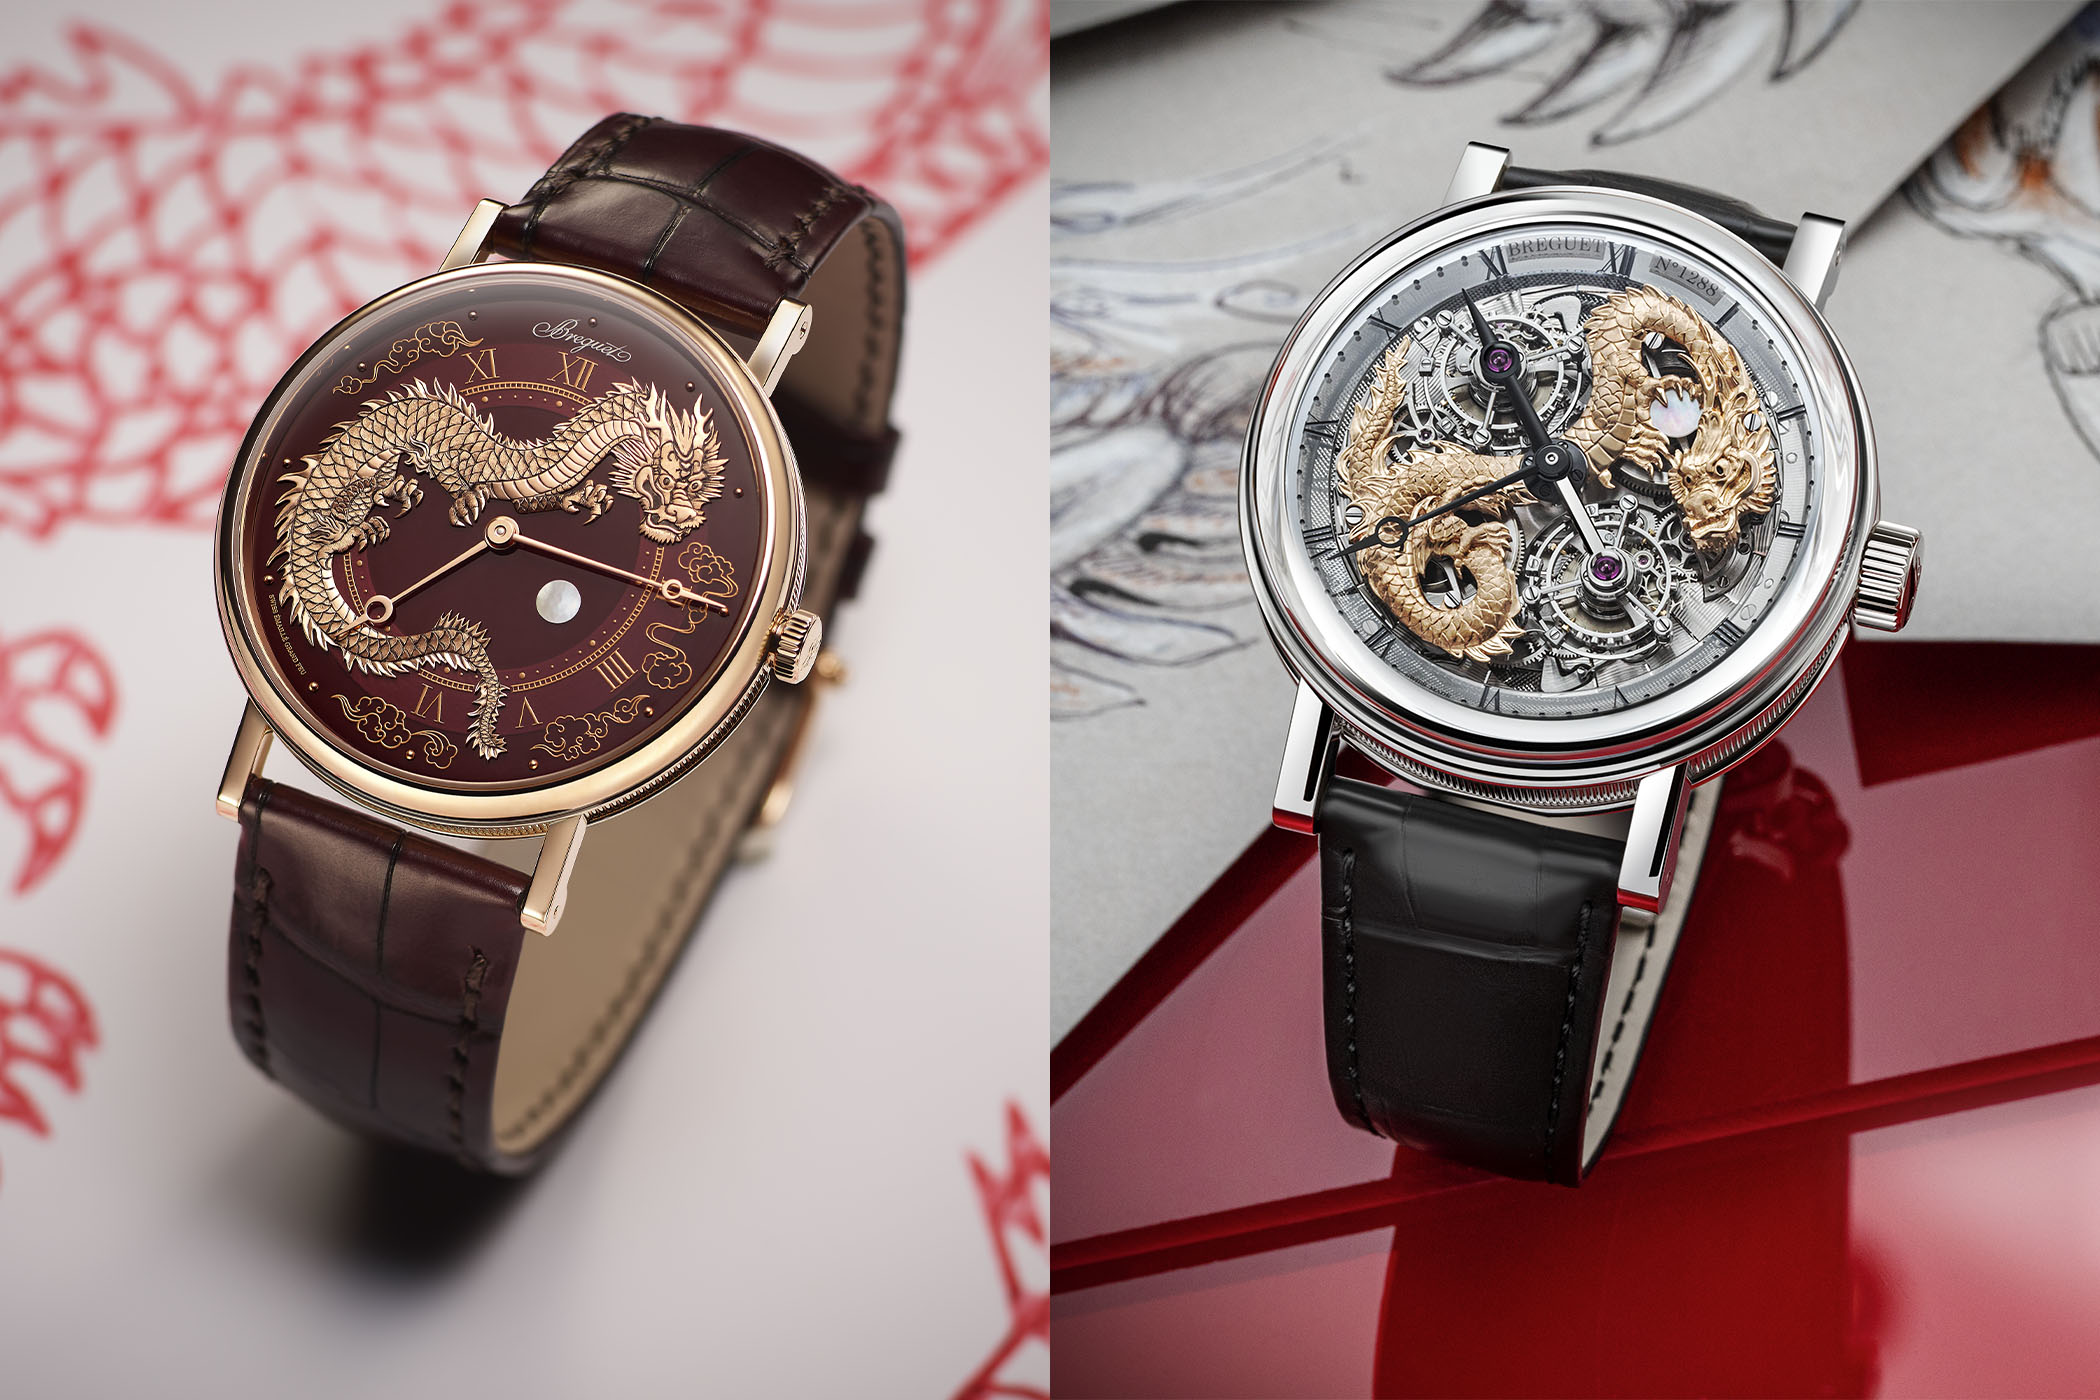 Introducing: The Breguet Classique 5345 and 7145 Year of the Dragon